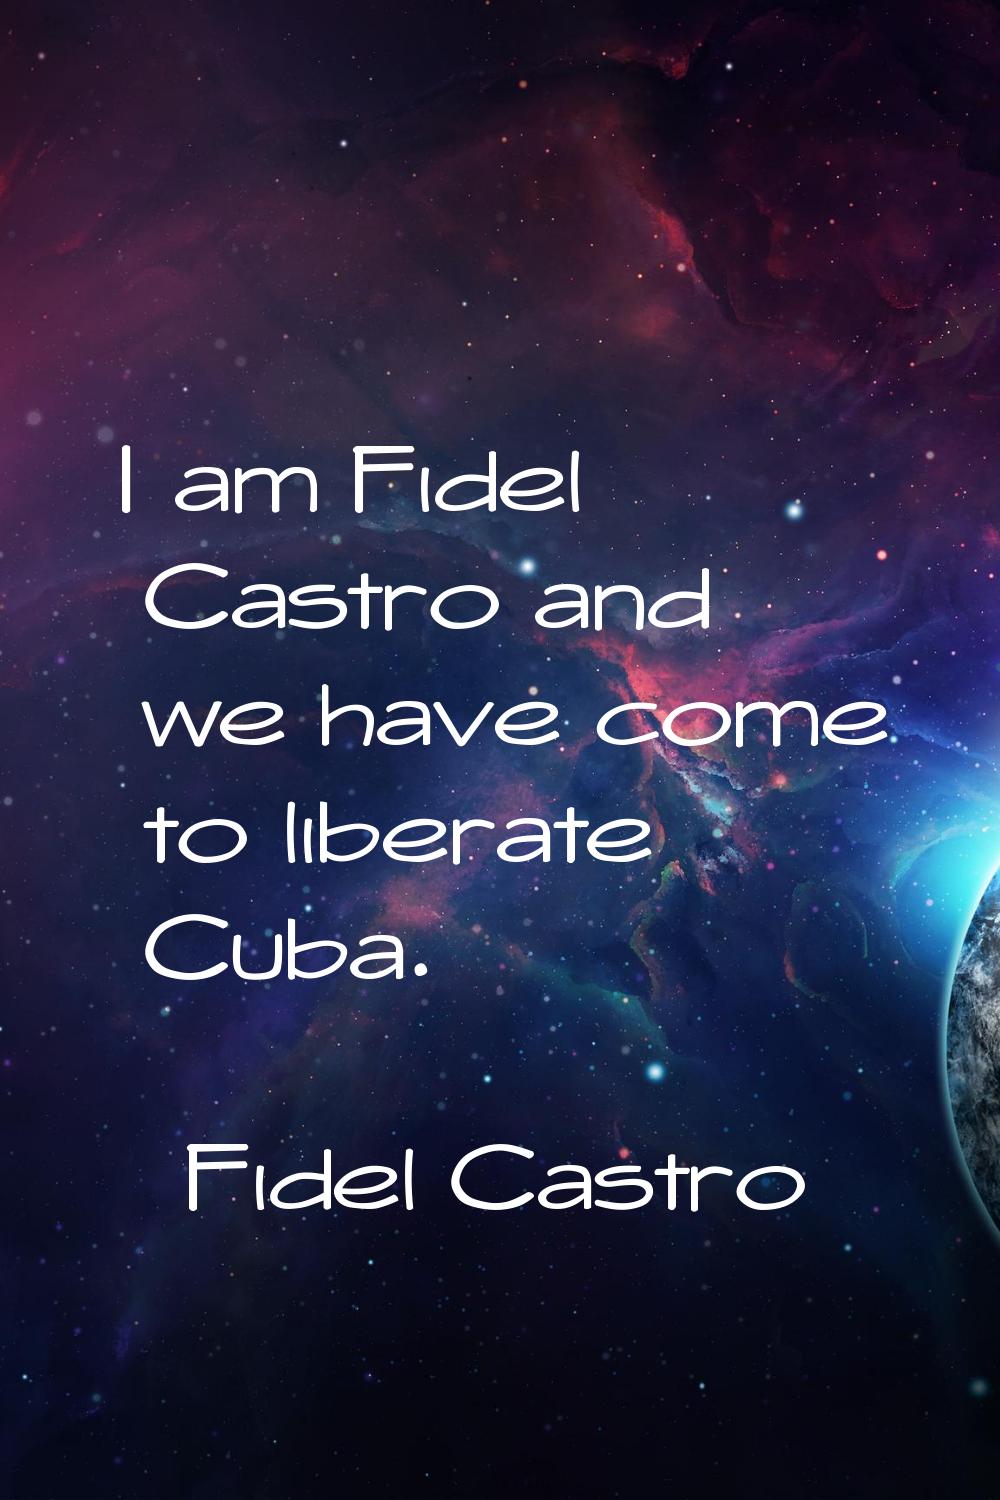 I am Fidel Castro and we have come to liberate Cuba.